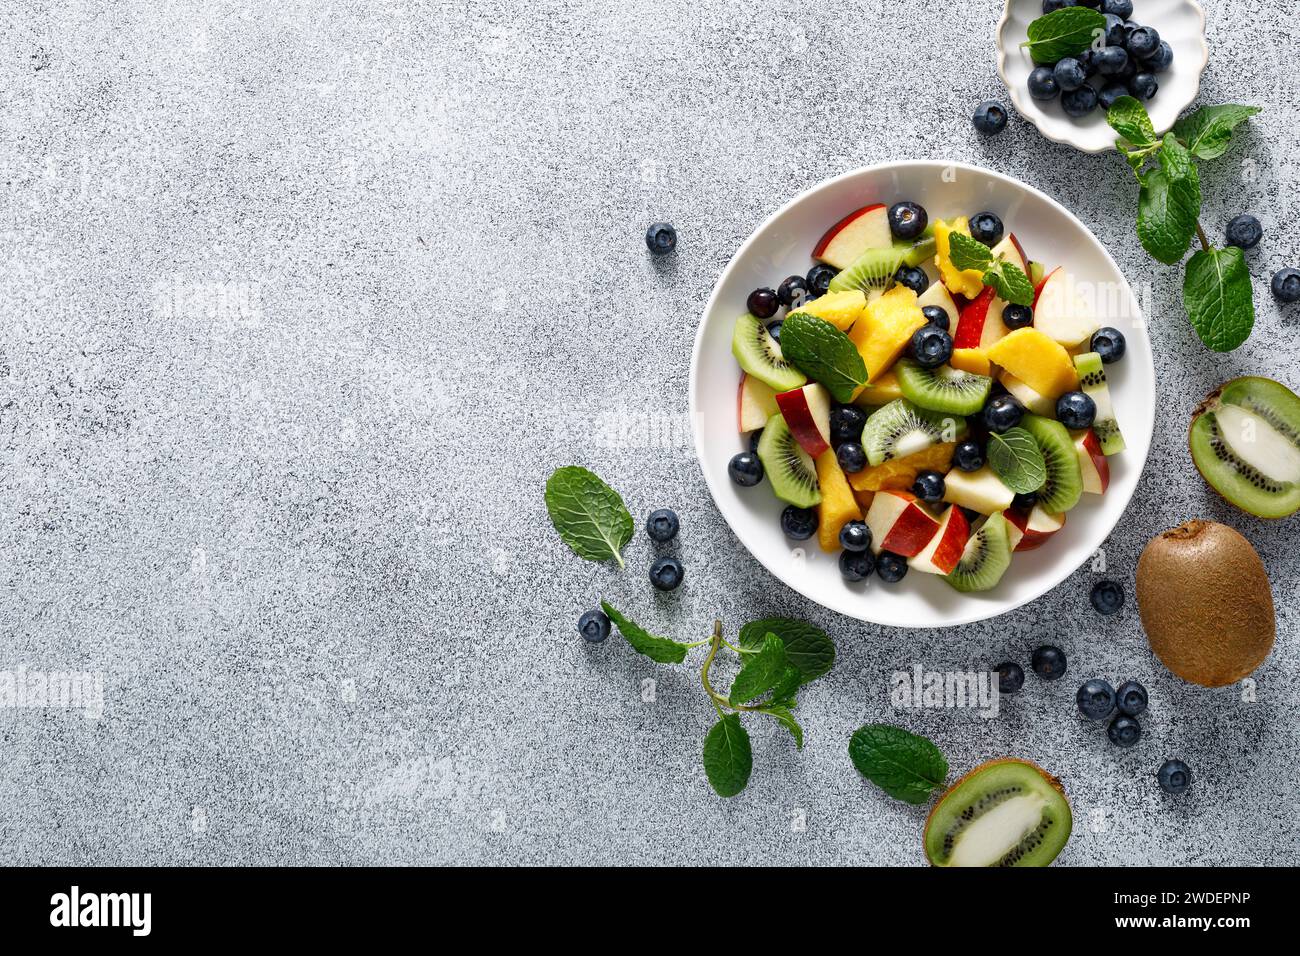 Fruit and berry salad with mango, kiwi, apple, blueberry and fresh mint leaves. Healthy food, diet. Top view Stock Photo